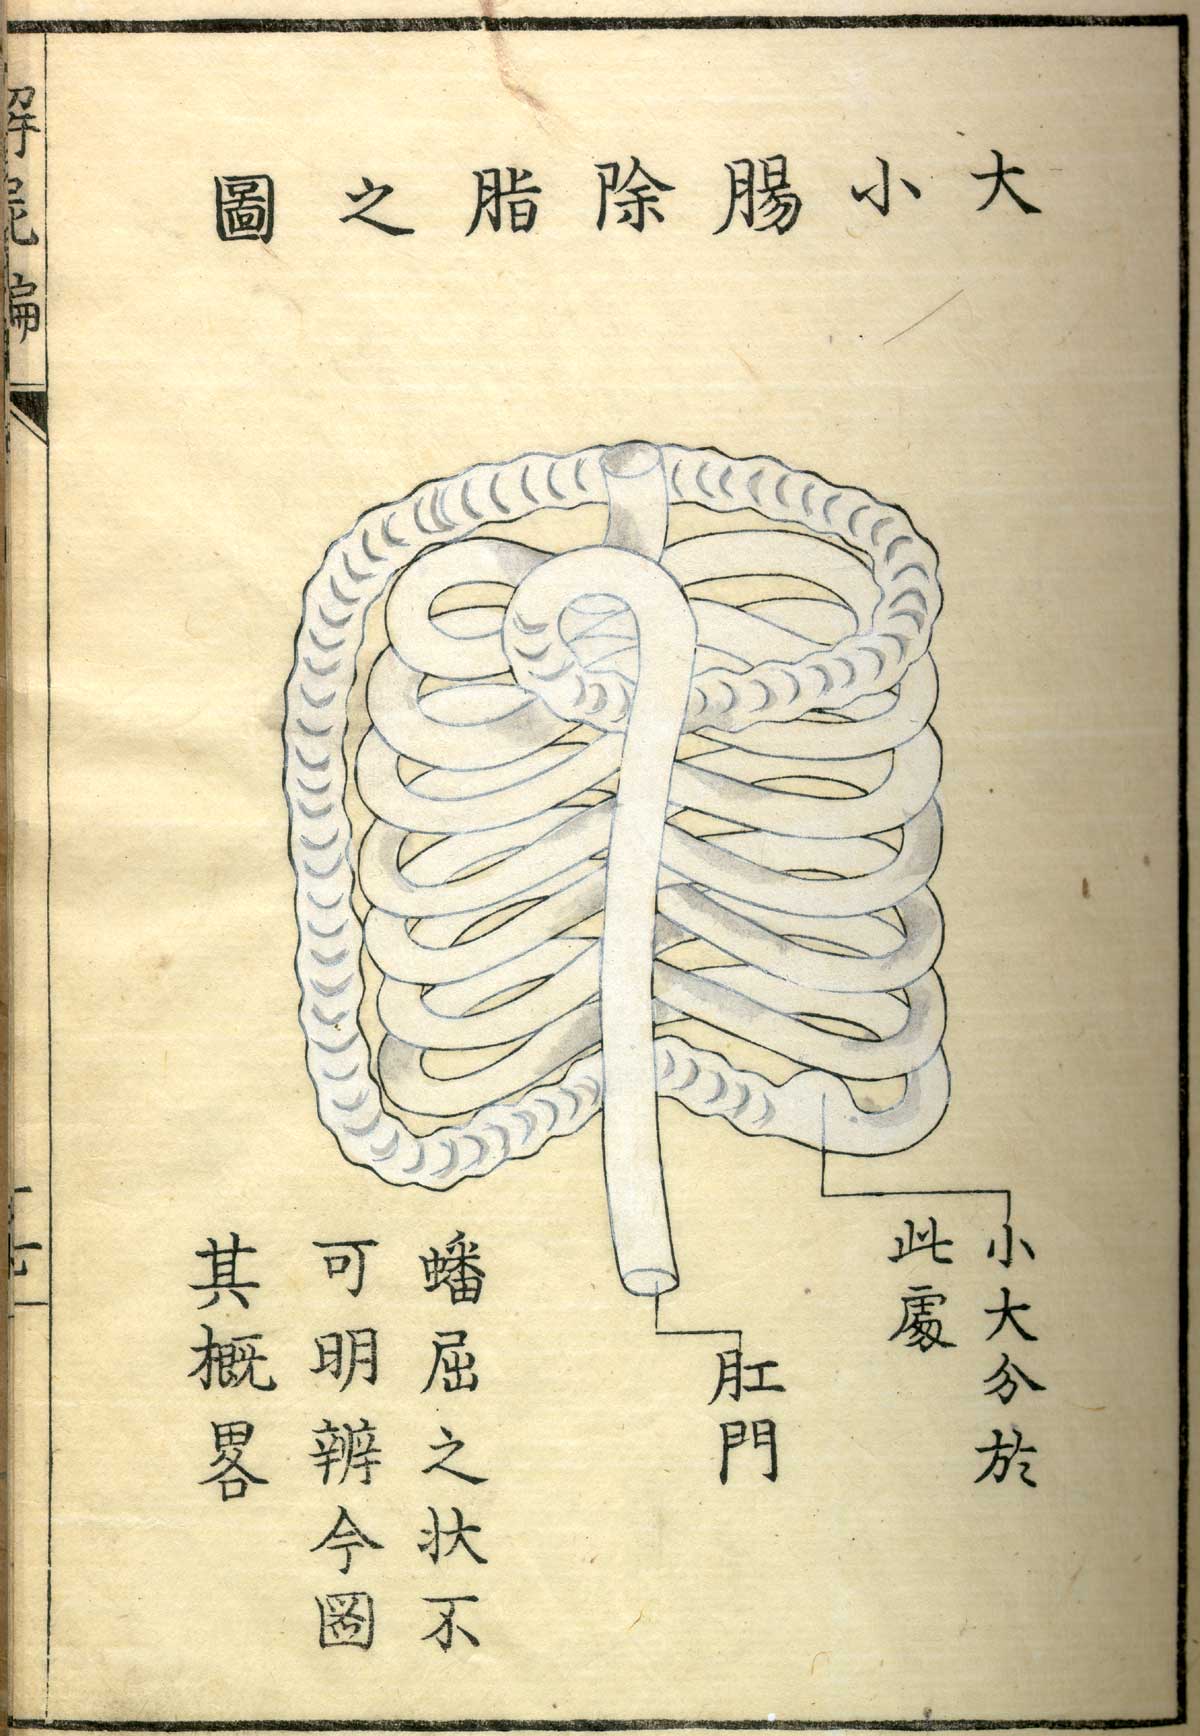 Hand colored woodcut of the large and small intestines with Japanese text above and below describing some of the structures, from Shinnin Kawaguchi's Kaishi hen, NLM Call no.: WZ 260 K21k 1772.